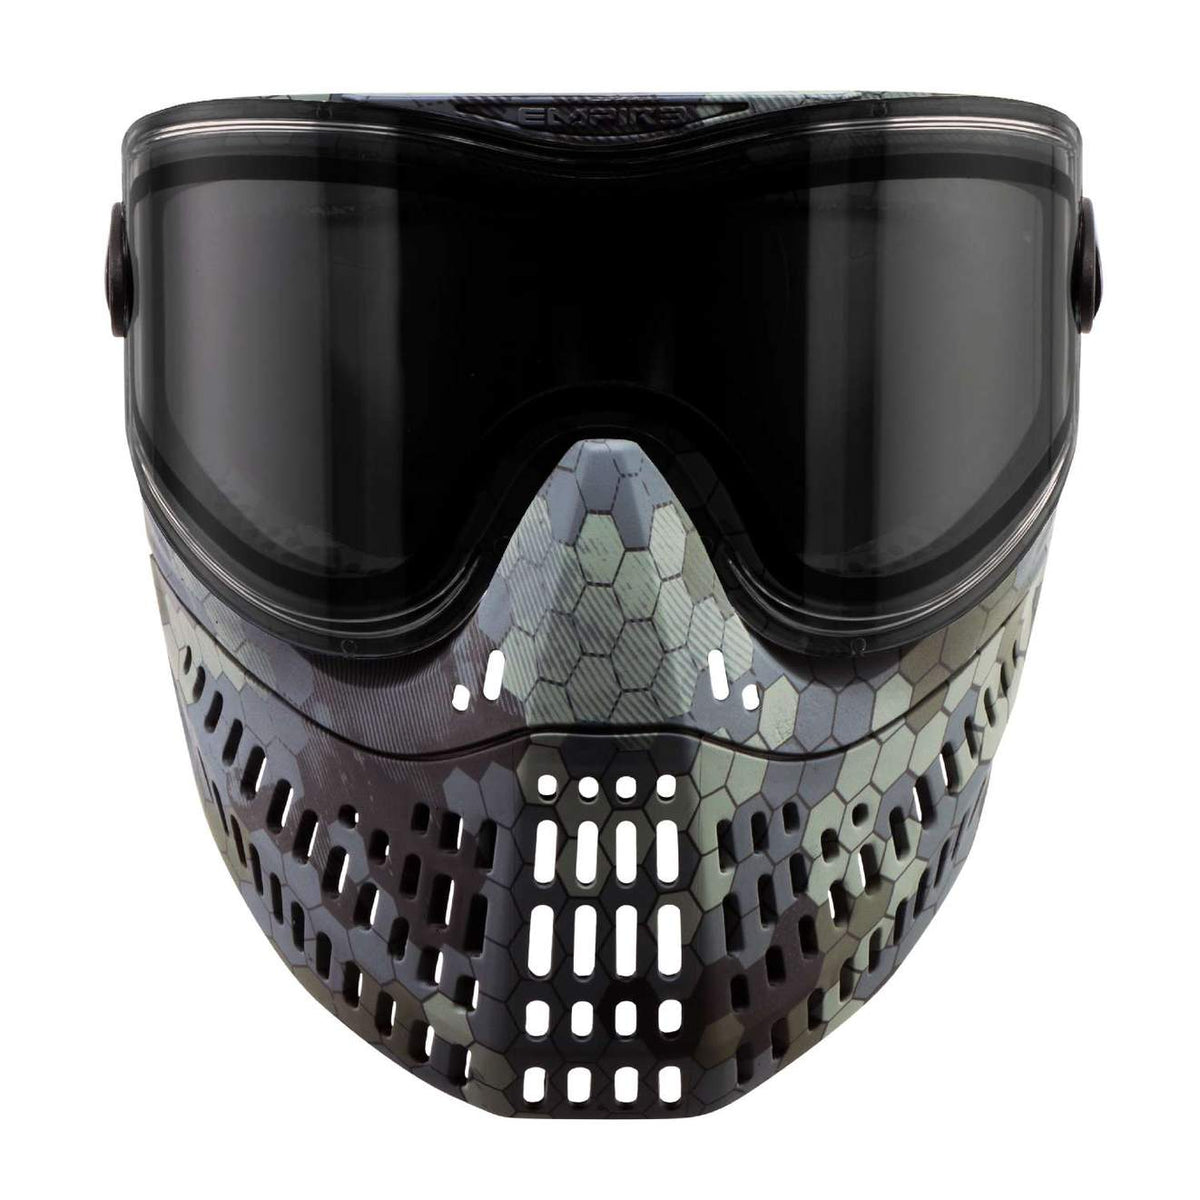 JT Spectra Proflex SE mask, olive/brown w/thermal lens - Airsoft Extreme